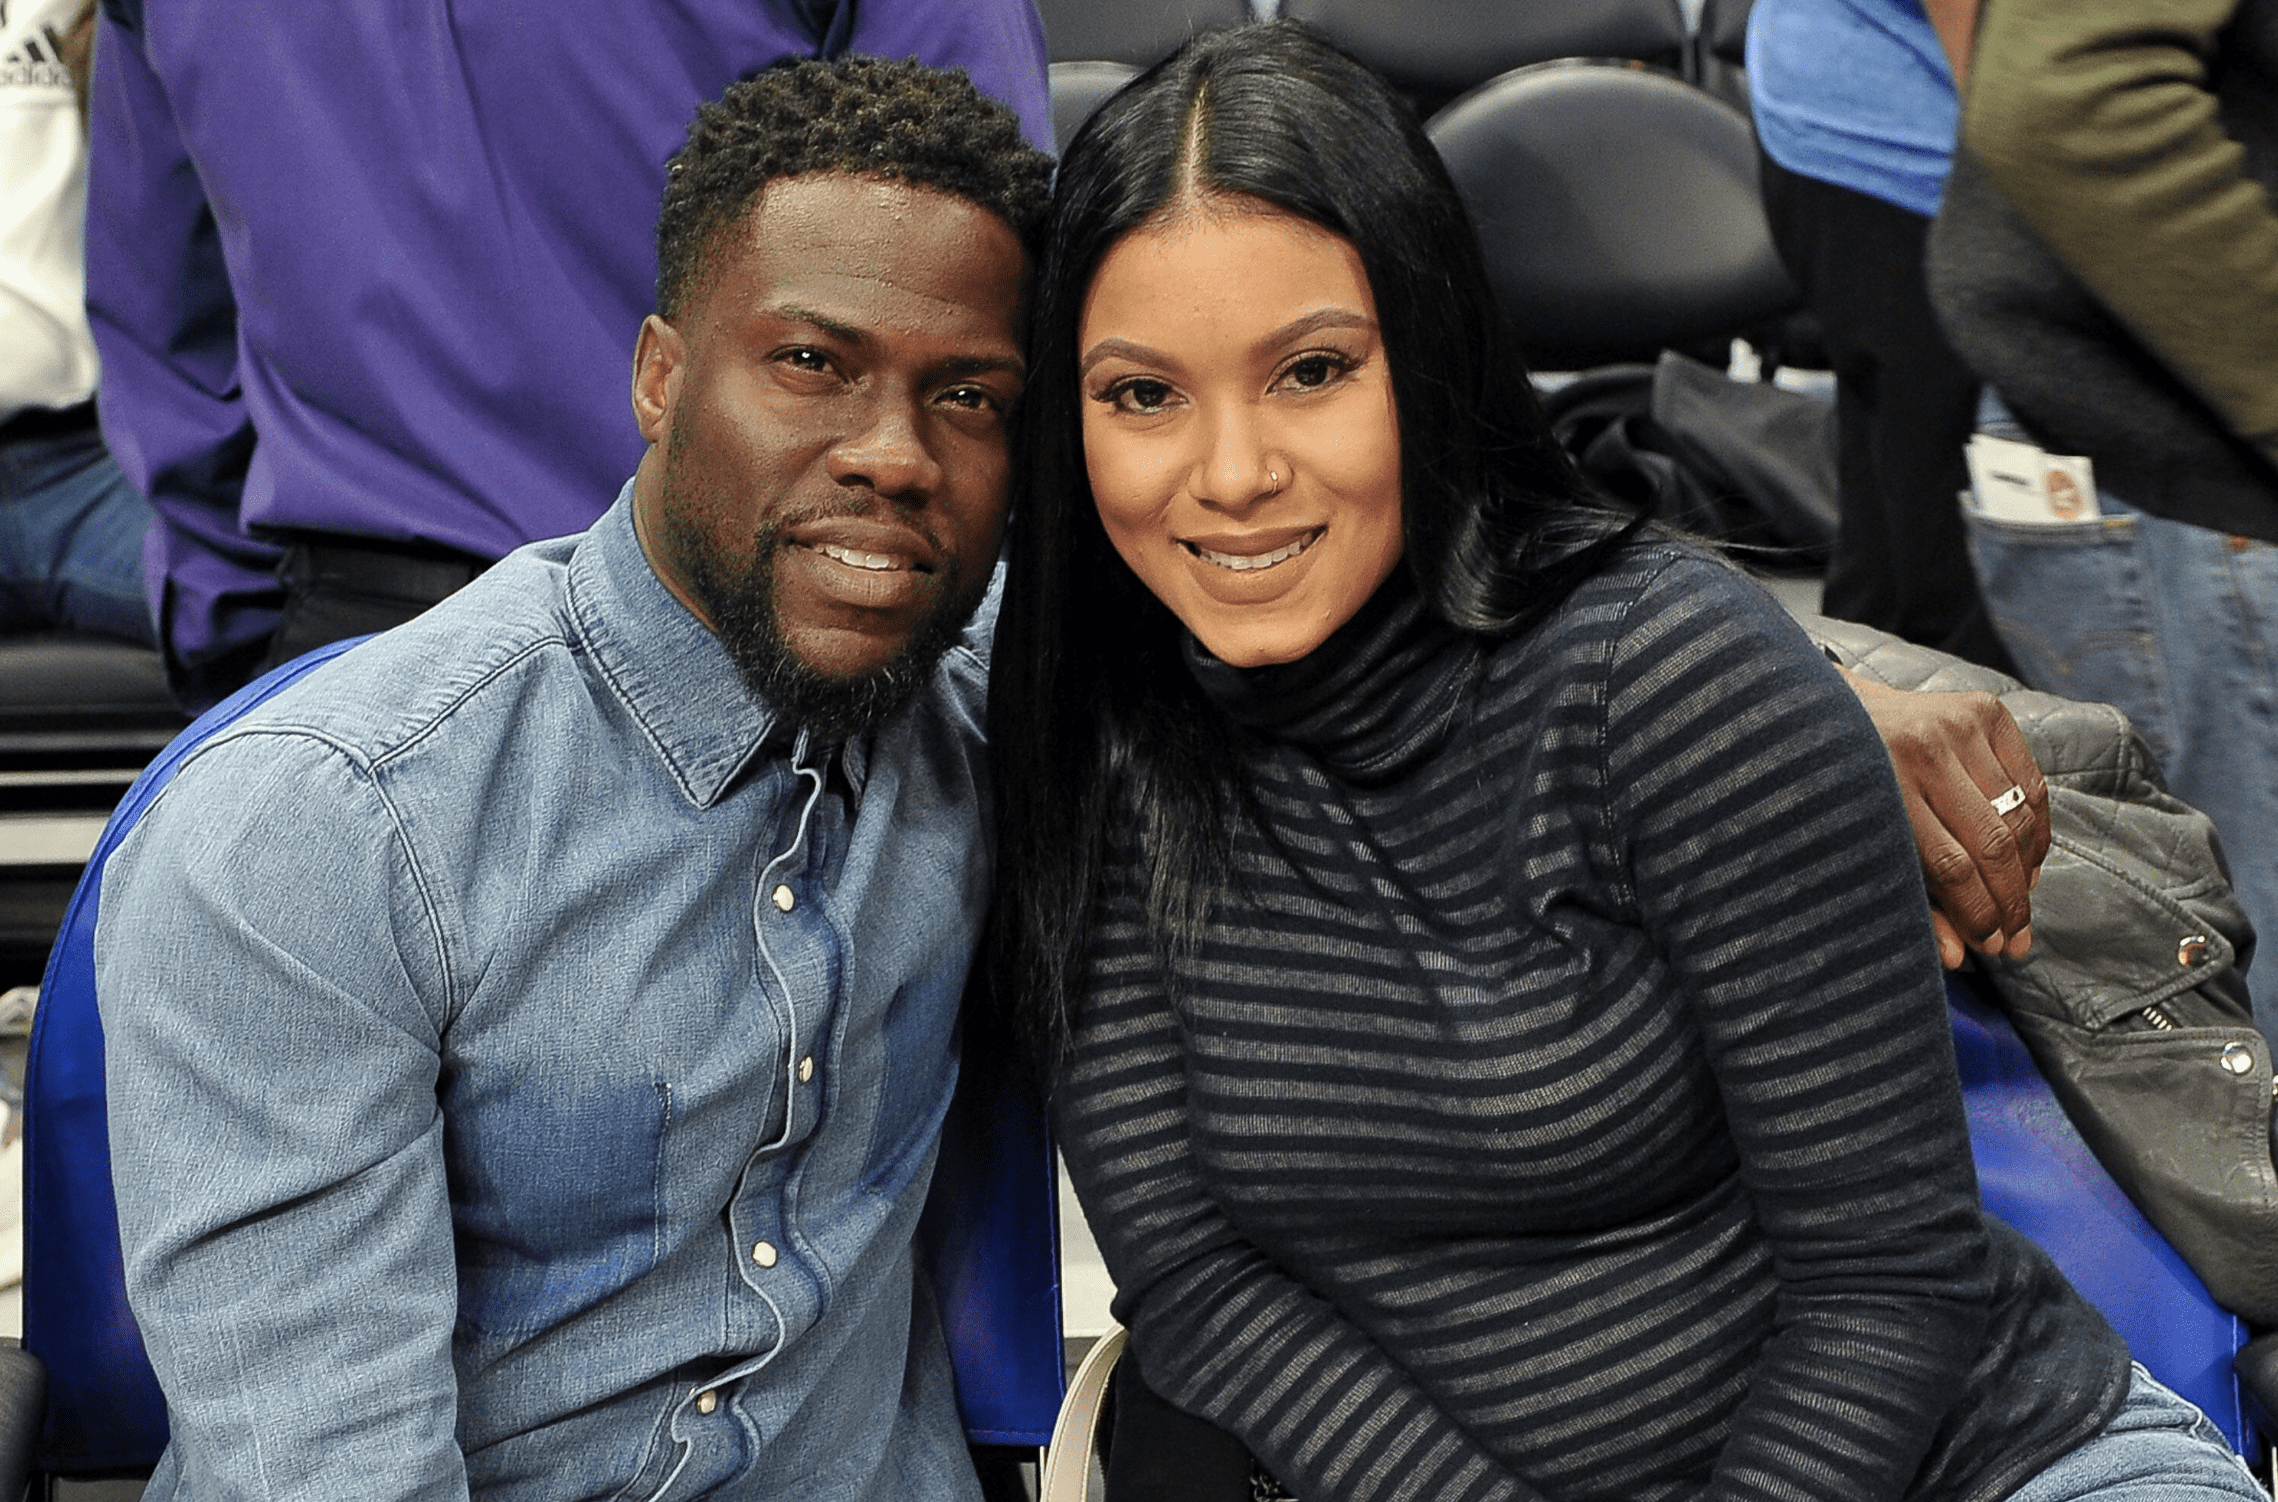 Kevin Hart and Eniko Parrish at a basketball game at Staples Center on January 22, 2018 in Los Angeles, California. | Source: Getty Images